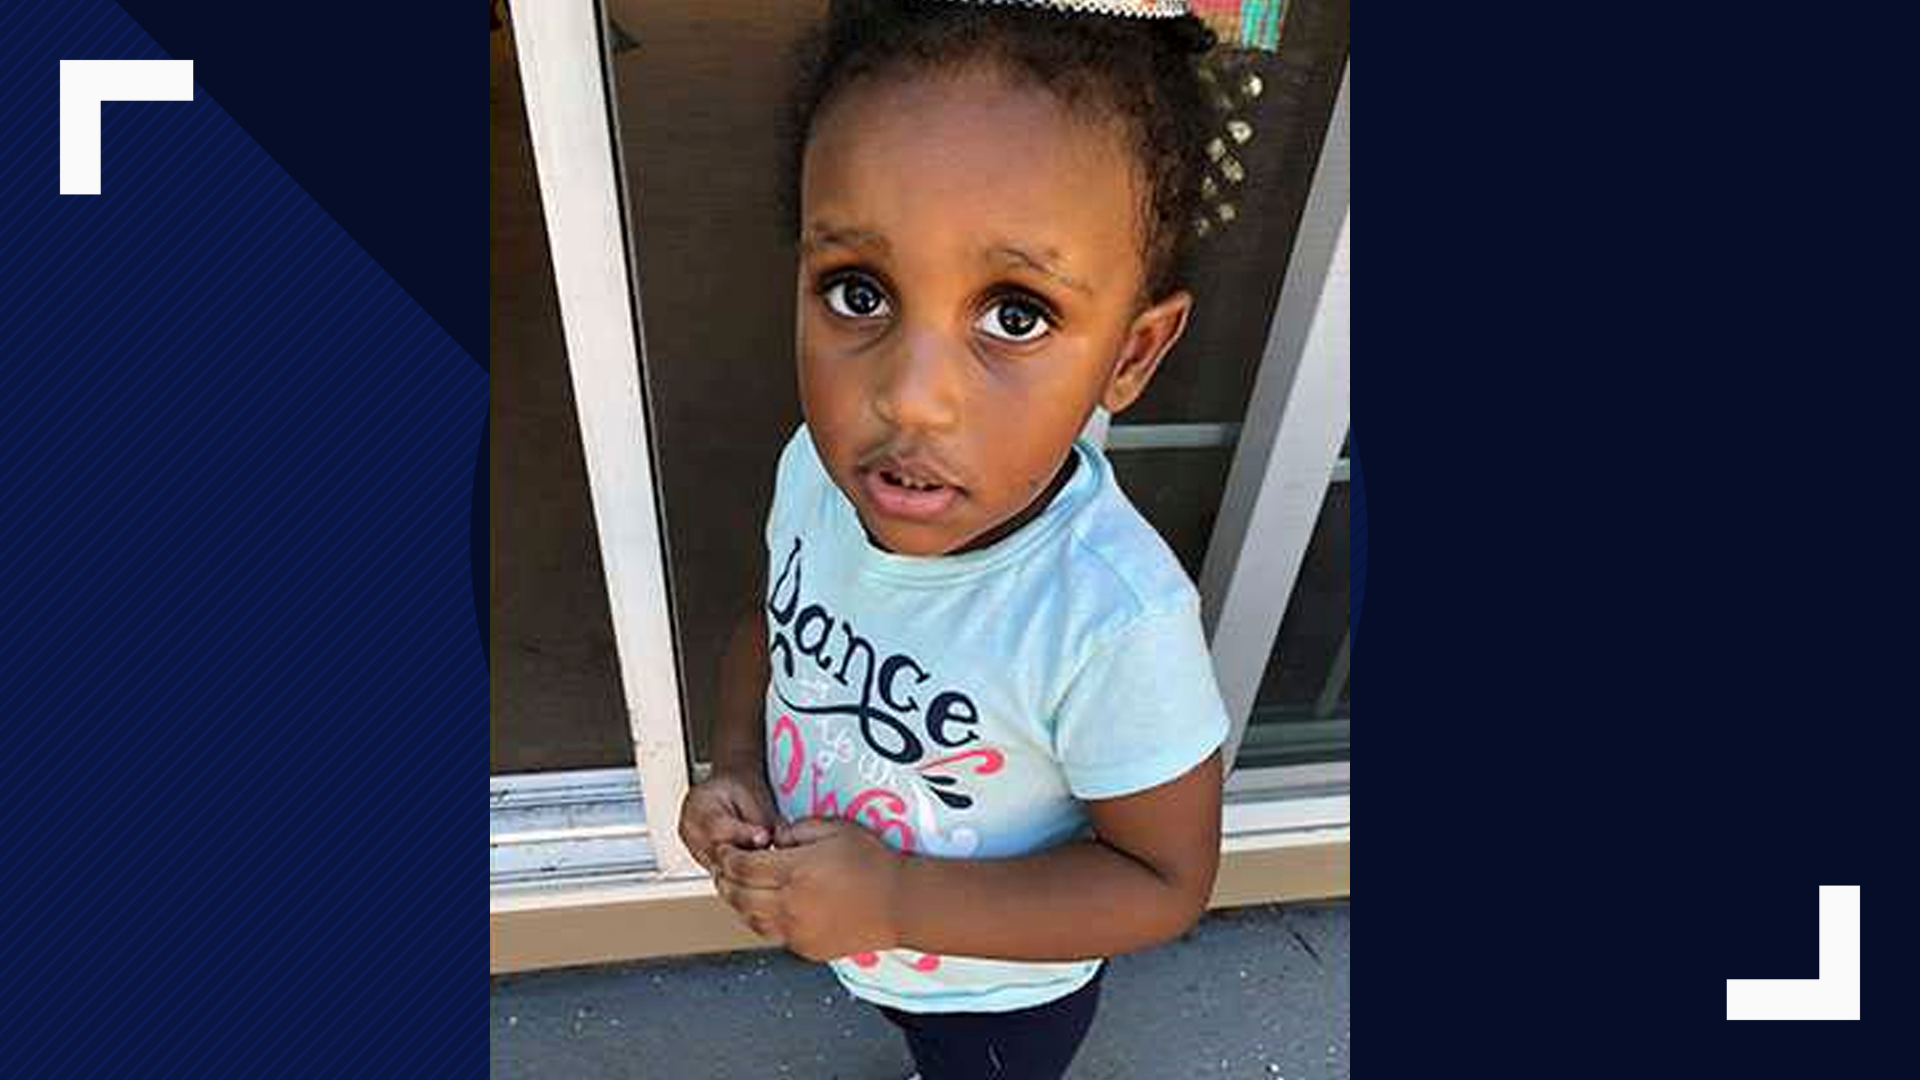 A body found in Minnesota matches the description of a 2-year-old girl whose mother was killed in Milwaukee this past week, a spokesman for the Minnesota Bureau of Criminal Apprehension said Saturday.